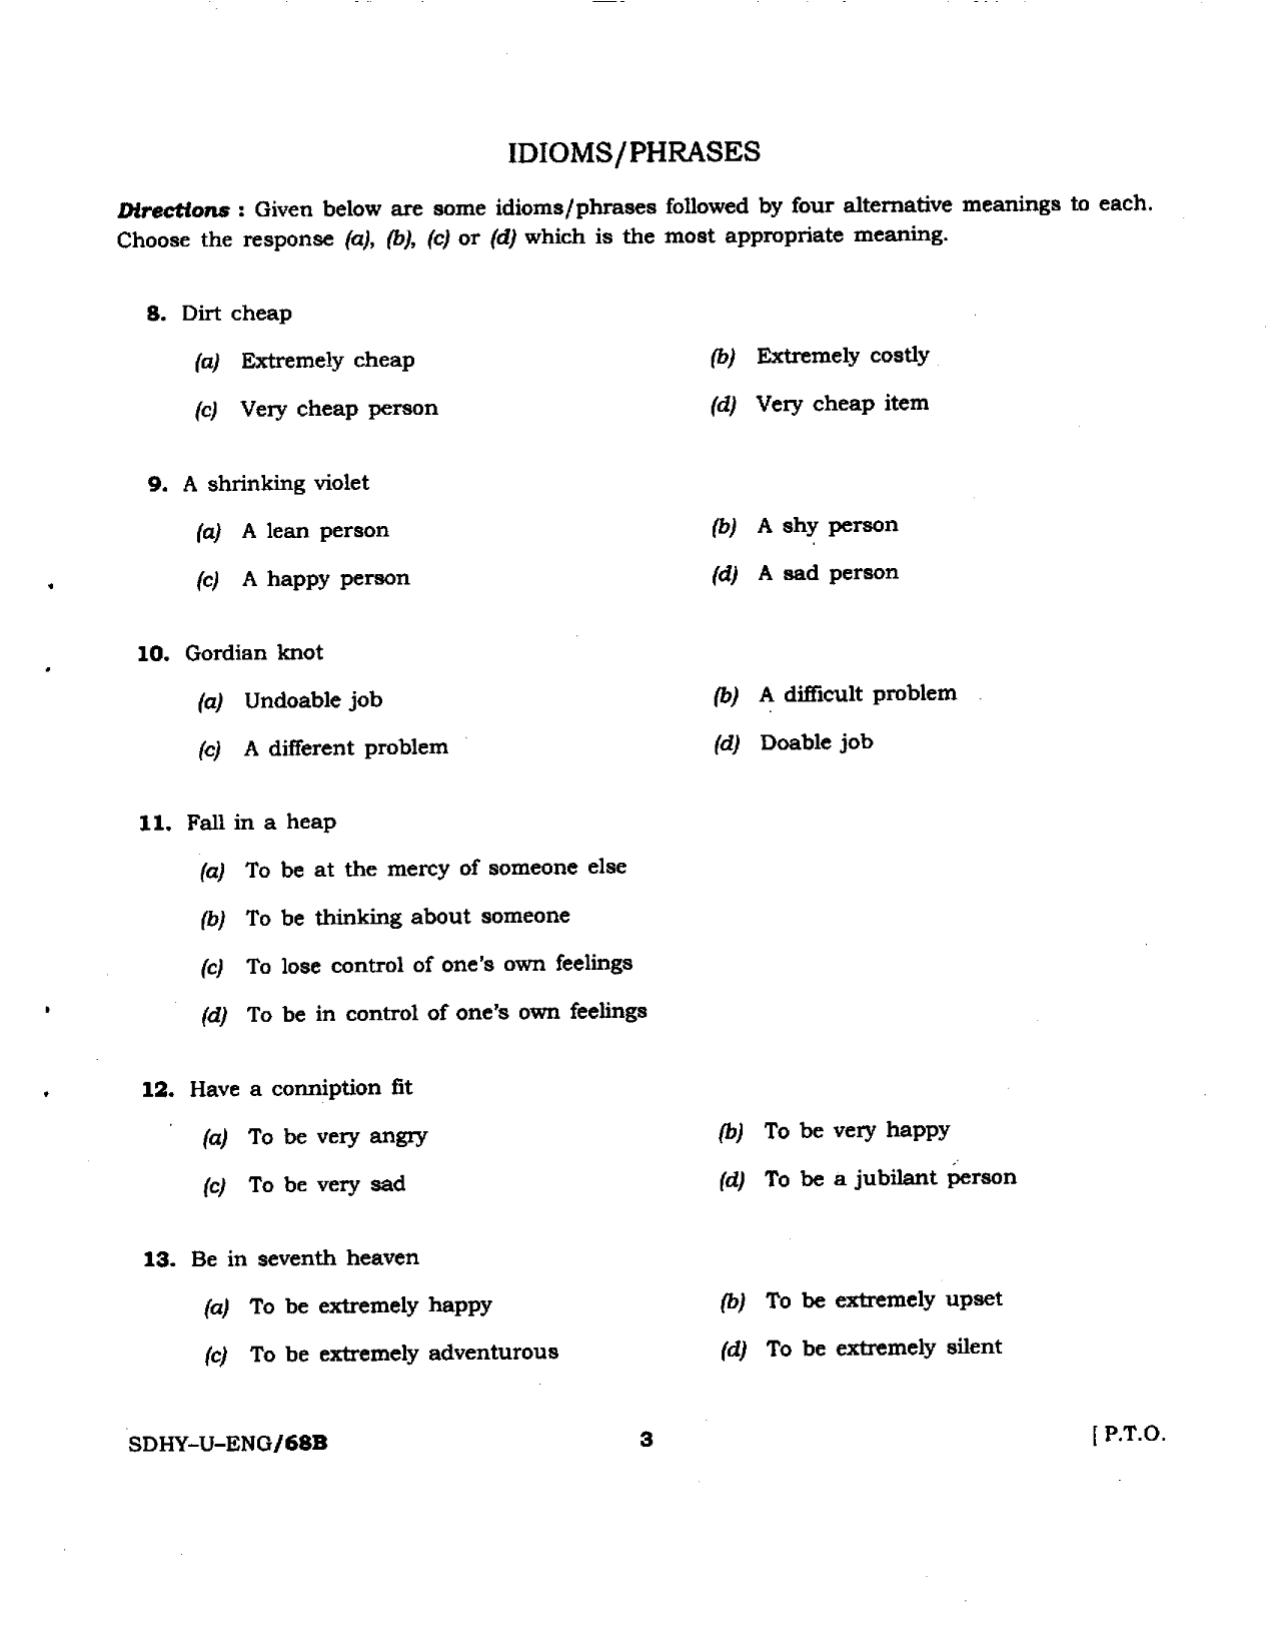 PSPCL General English Model Question Paper - Page 3